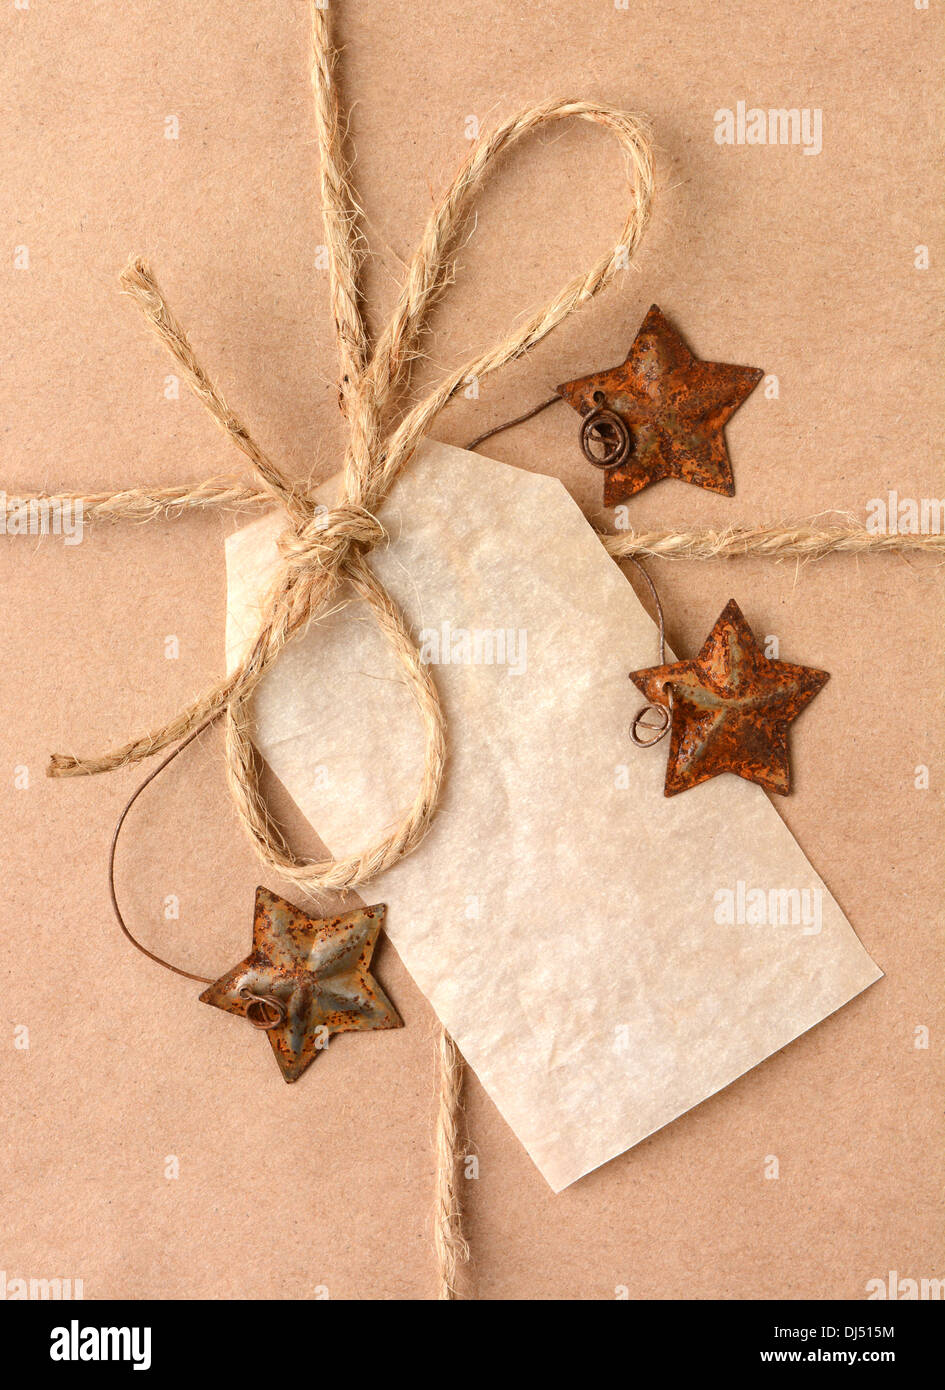 Closeup of a gift tag on a Christmas present. The package is wrapped in plain brown paper with a tied with twine. Stock Photo